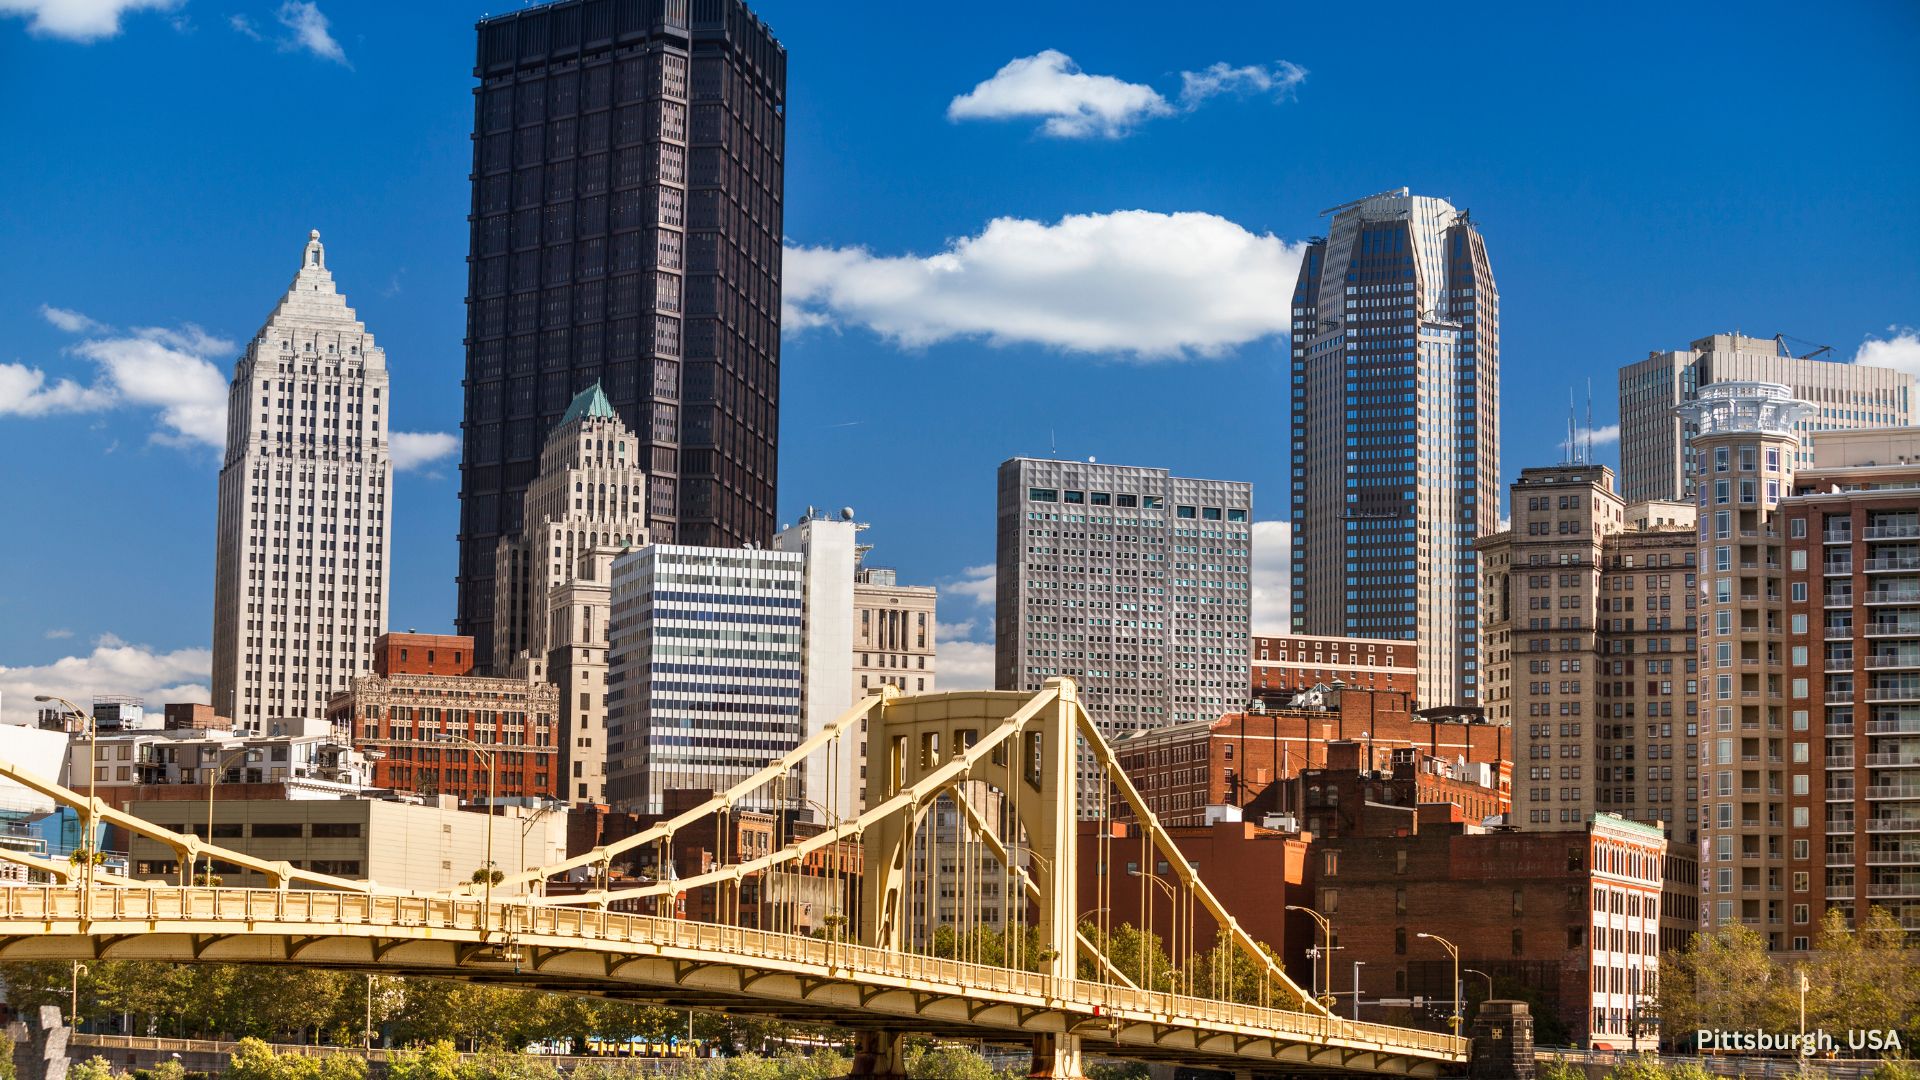 Pittsburgh, USA - 10 Most Affordable Cities in the World for Housing